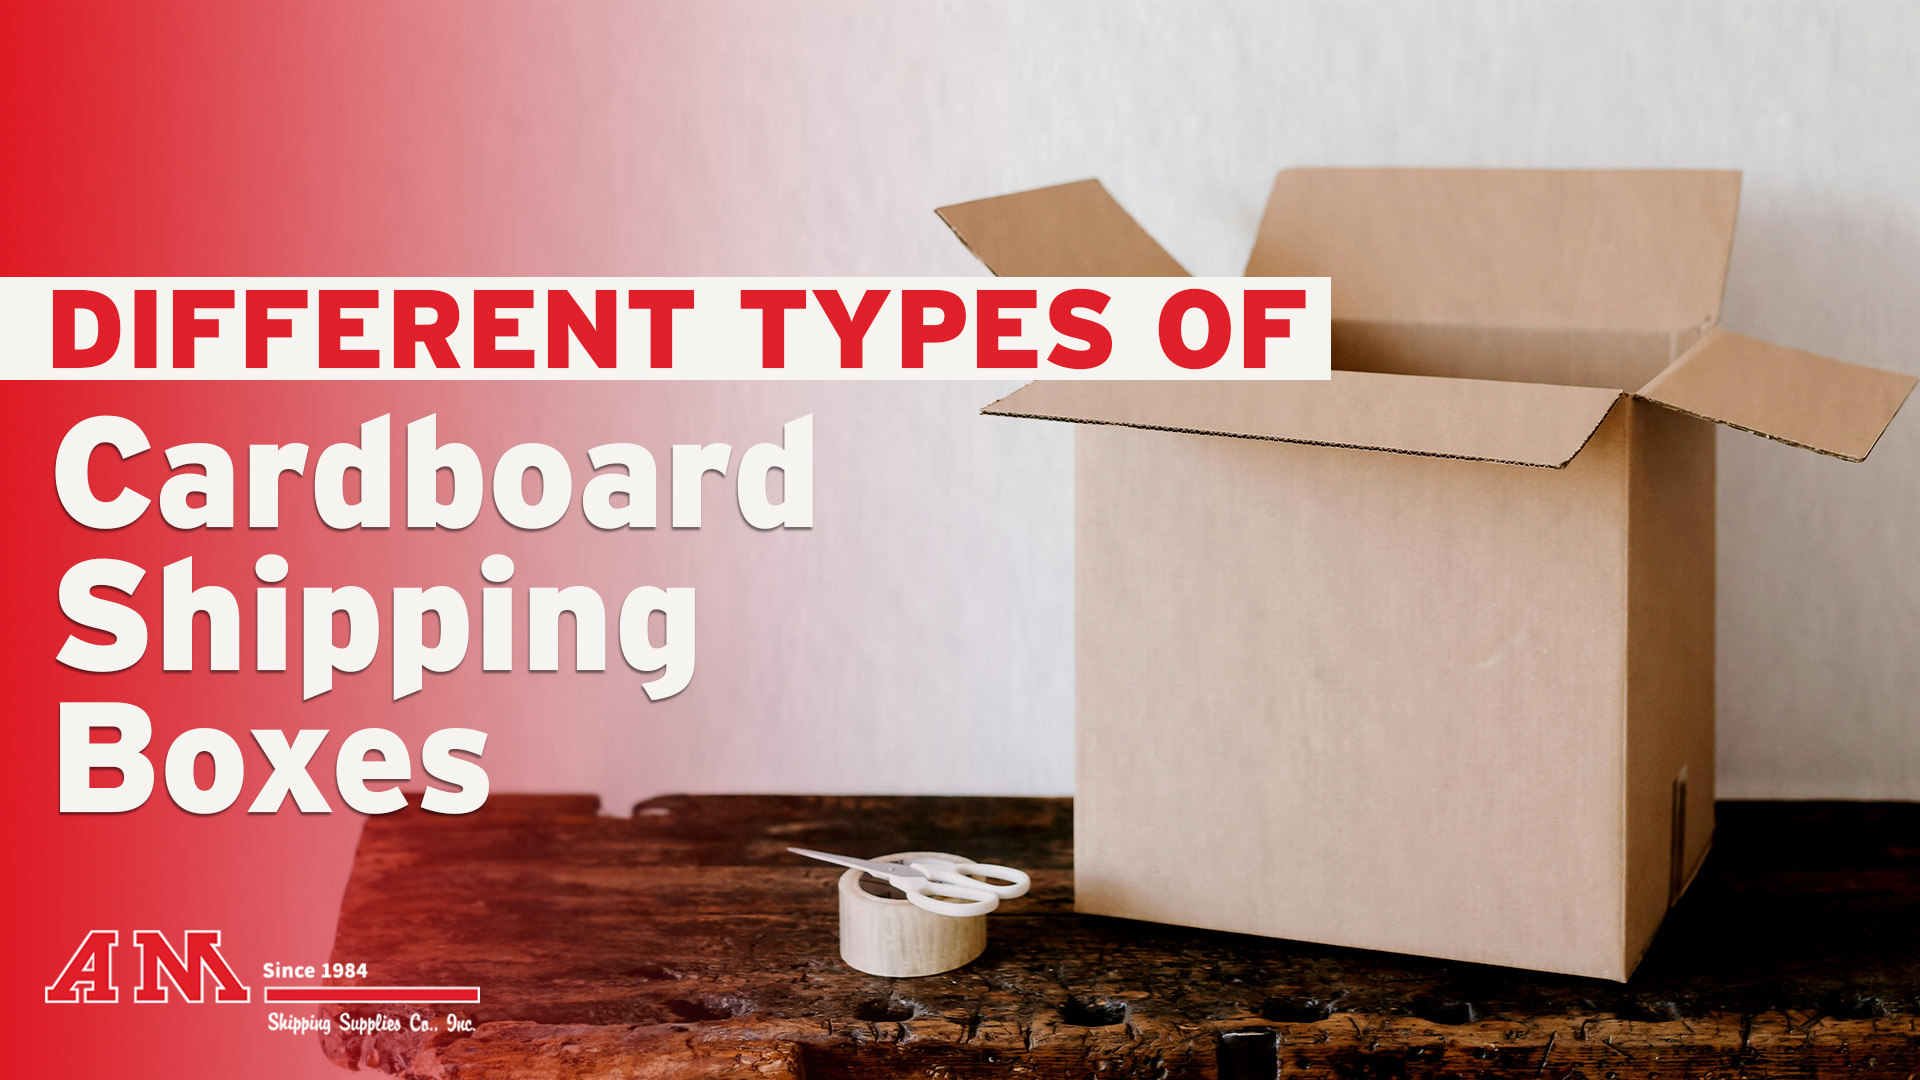 Different Types of Cardboard Shipping Boxes